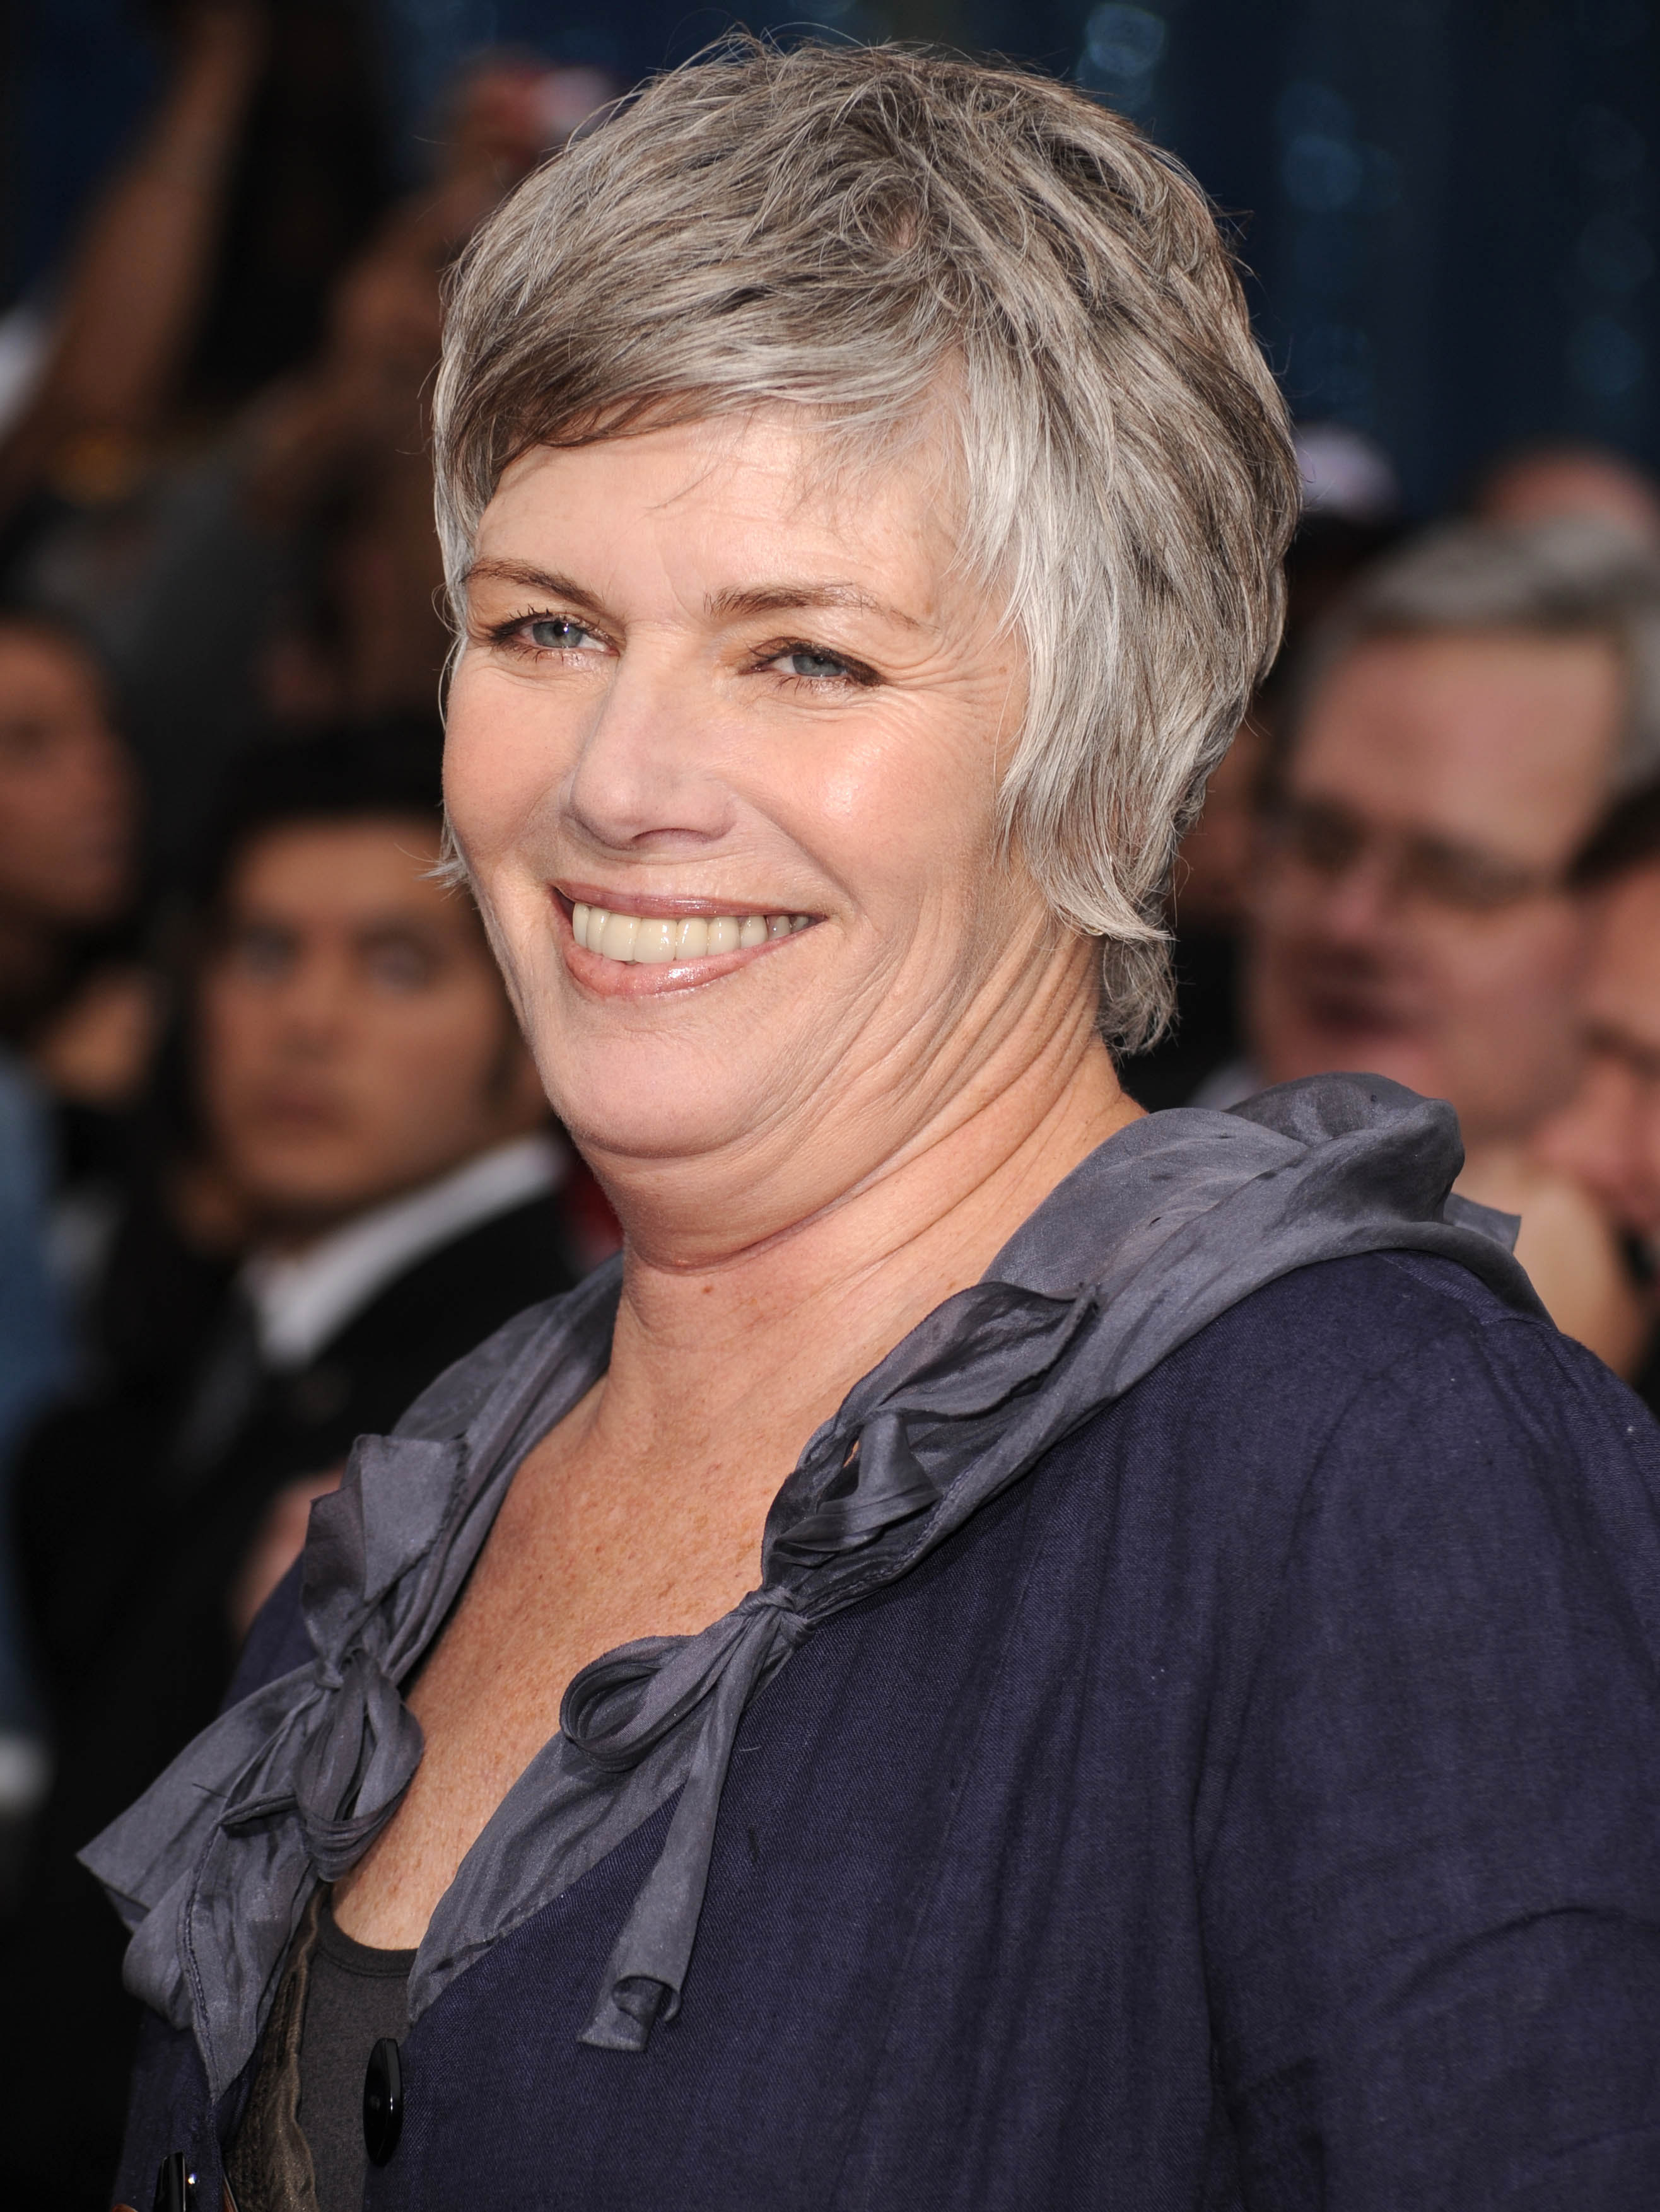 Kelly McGillis besucht die "Prince of Persia: The Sands of Time"-Premiere in Los Angeles am 17. Mai 2010 in Hollywood, Kalifornien | Quelle: Getty Images